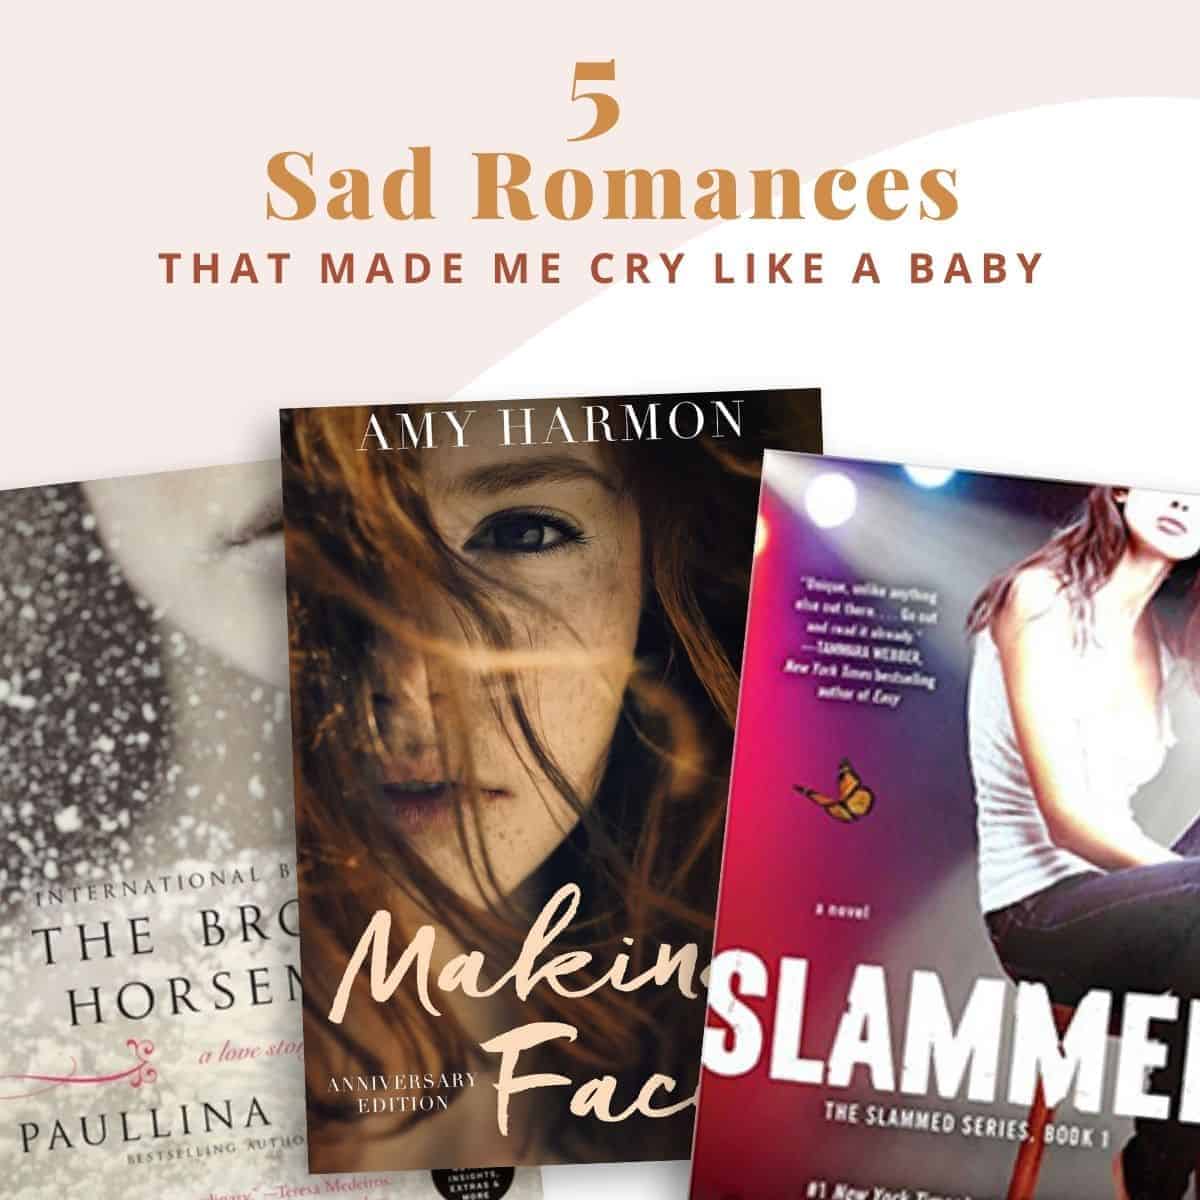 Grab a box of tissues, a bottle of wine, and some chocolates because this list of my 5 favorite sad romance books made me cry like a baby—I know you will, too!